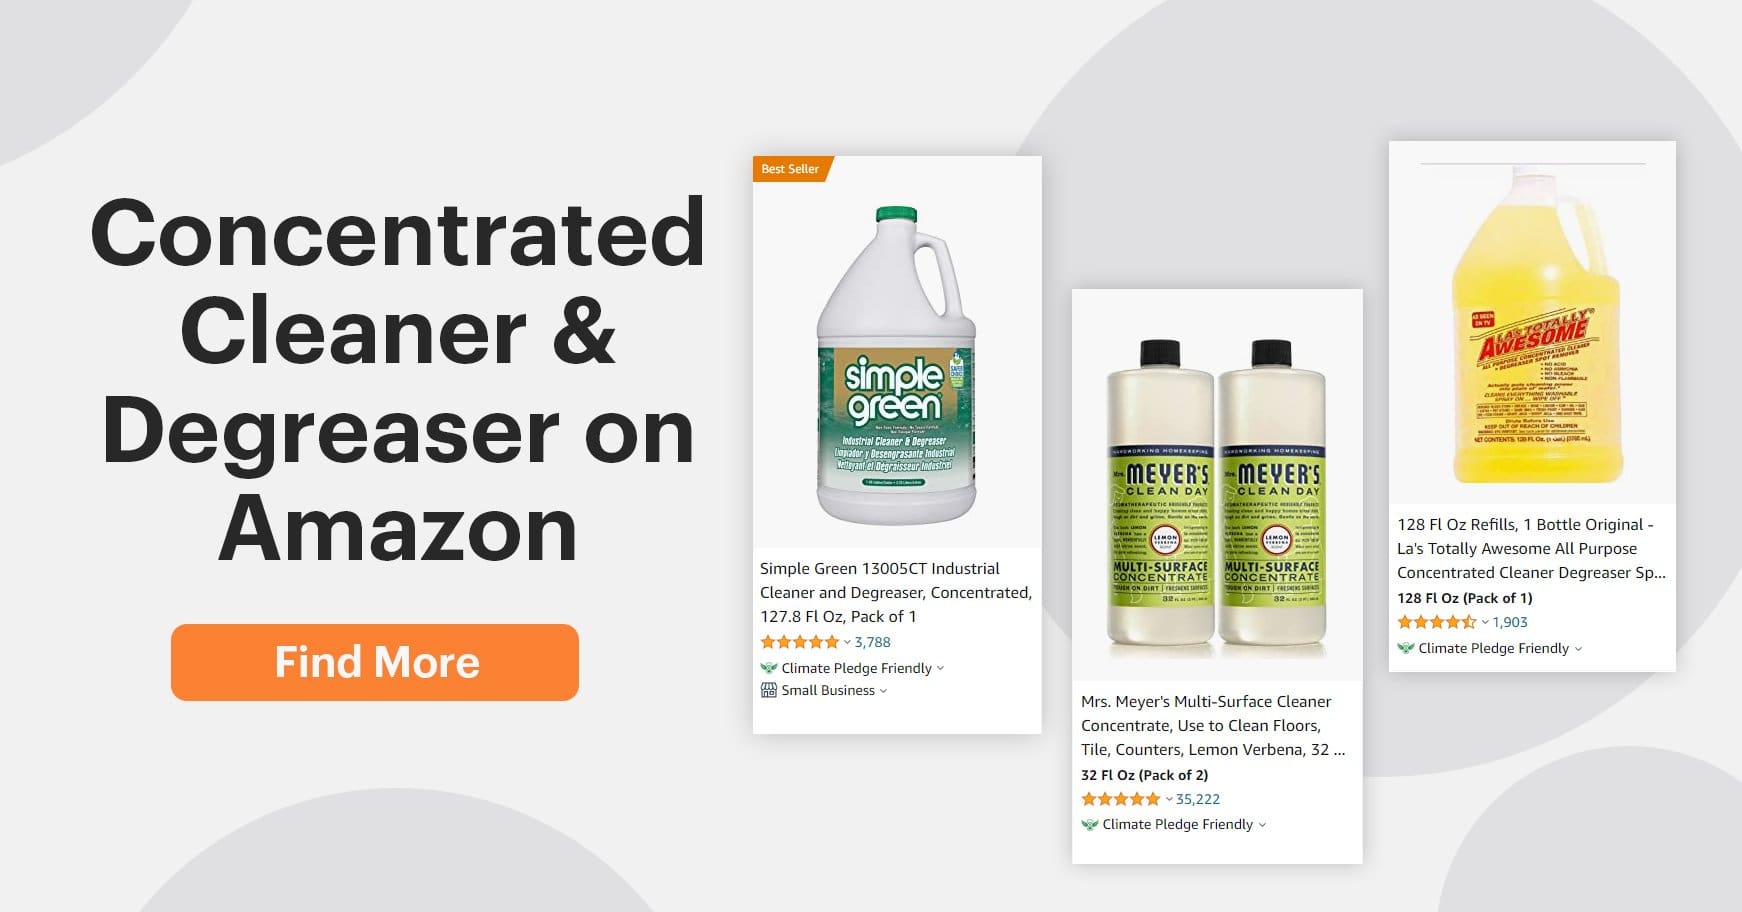 Screenshot of concentrated cleaner degreaser from Amazon website